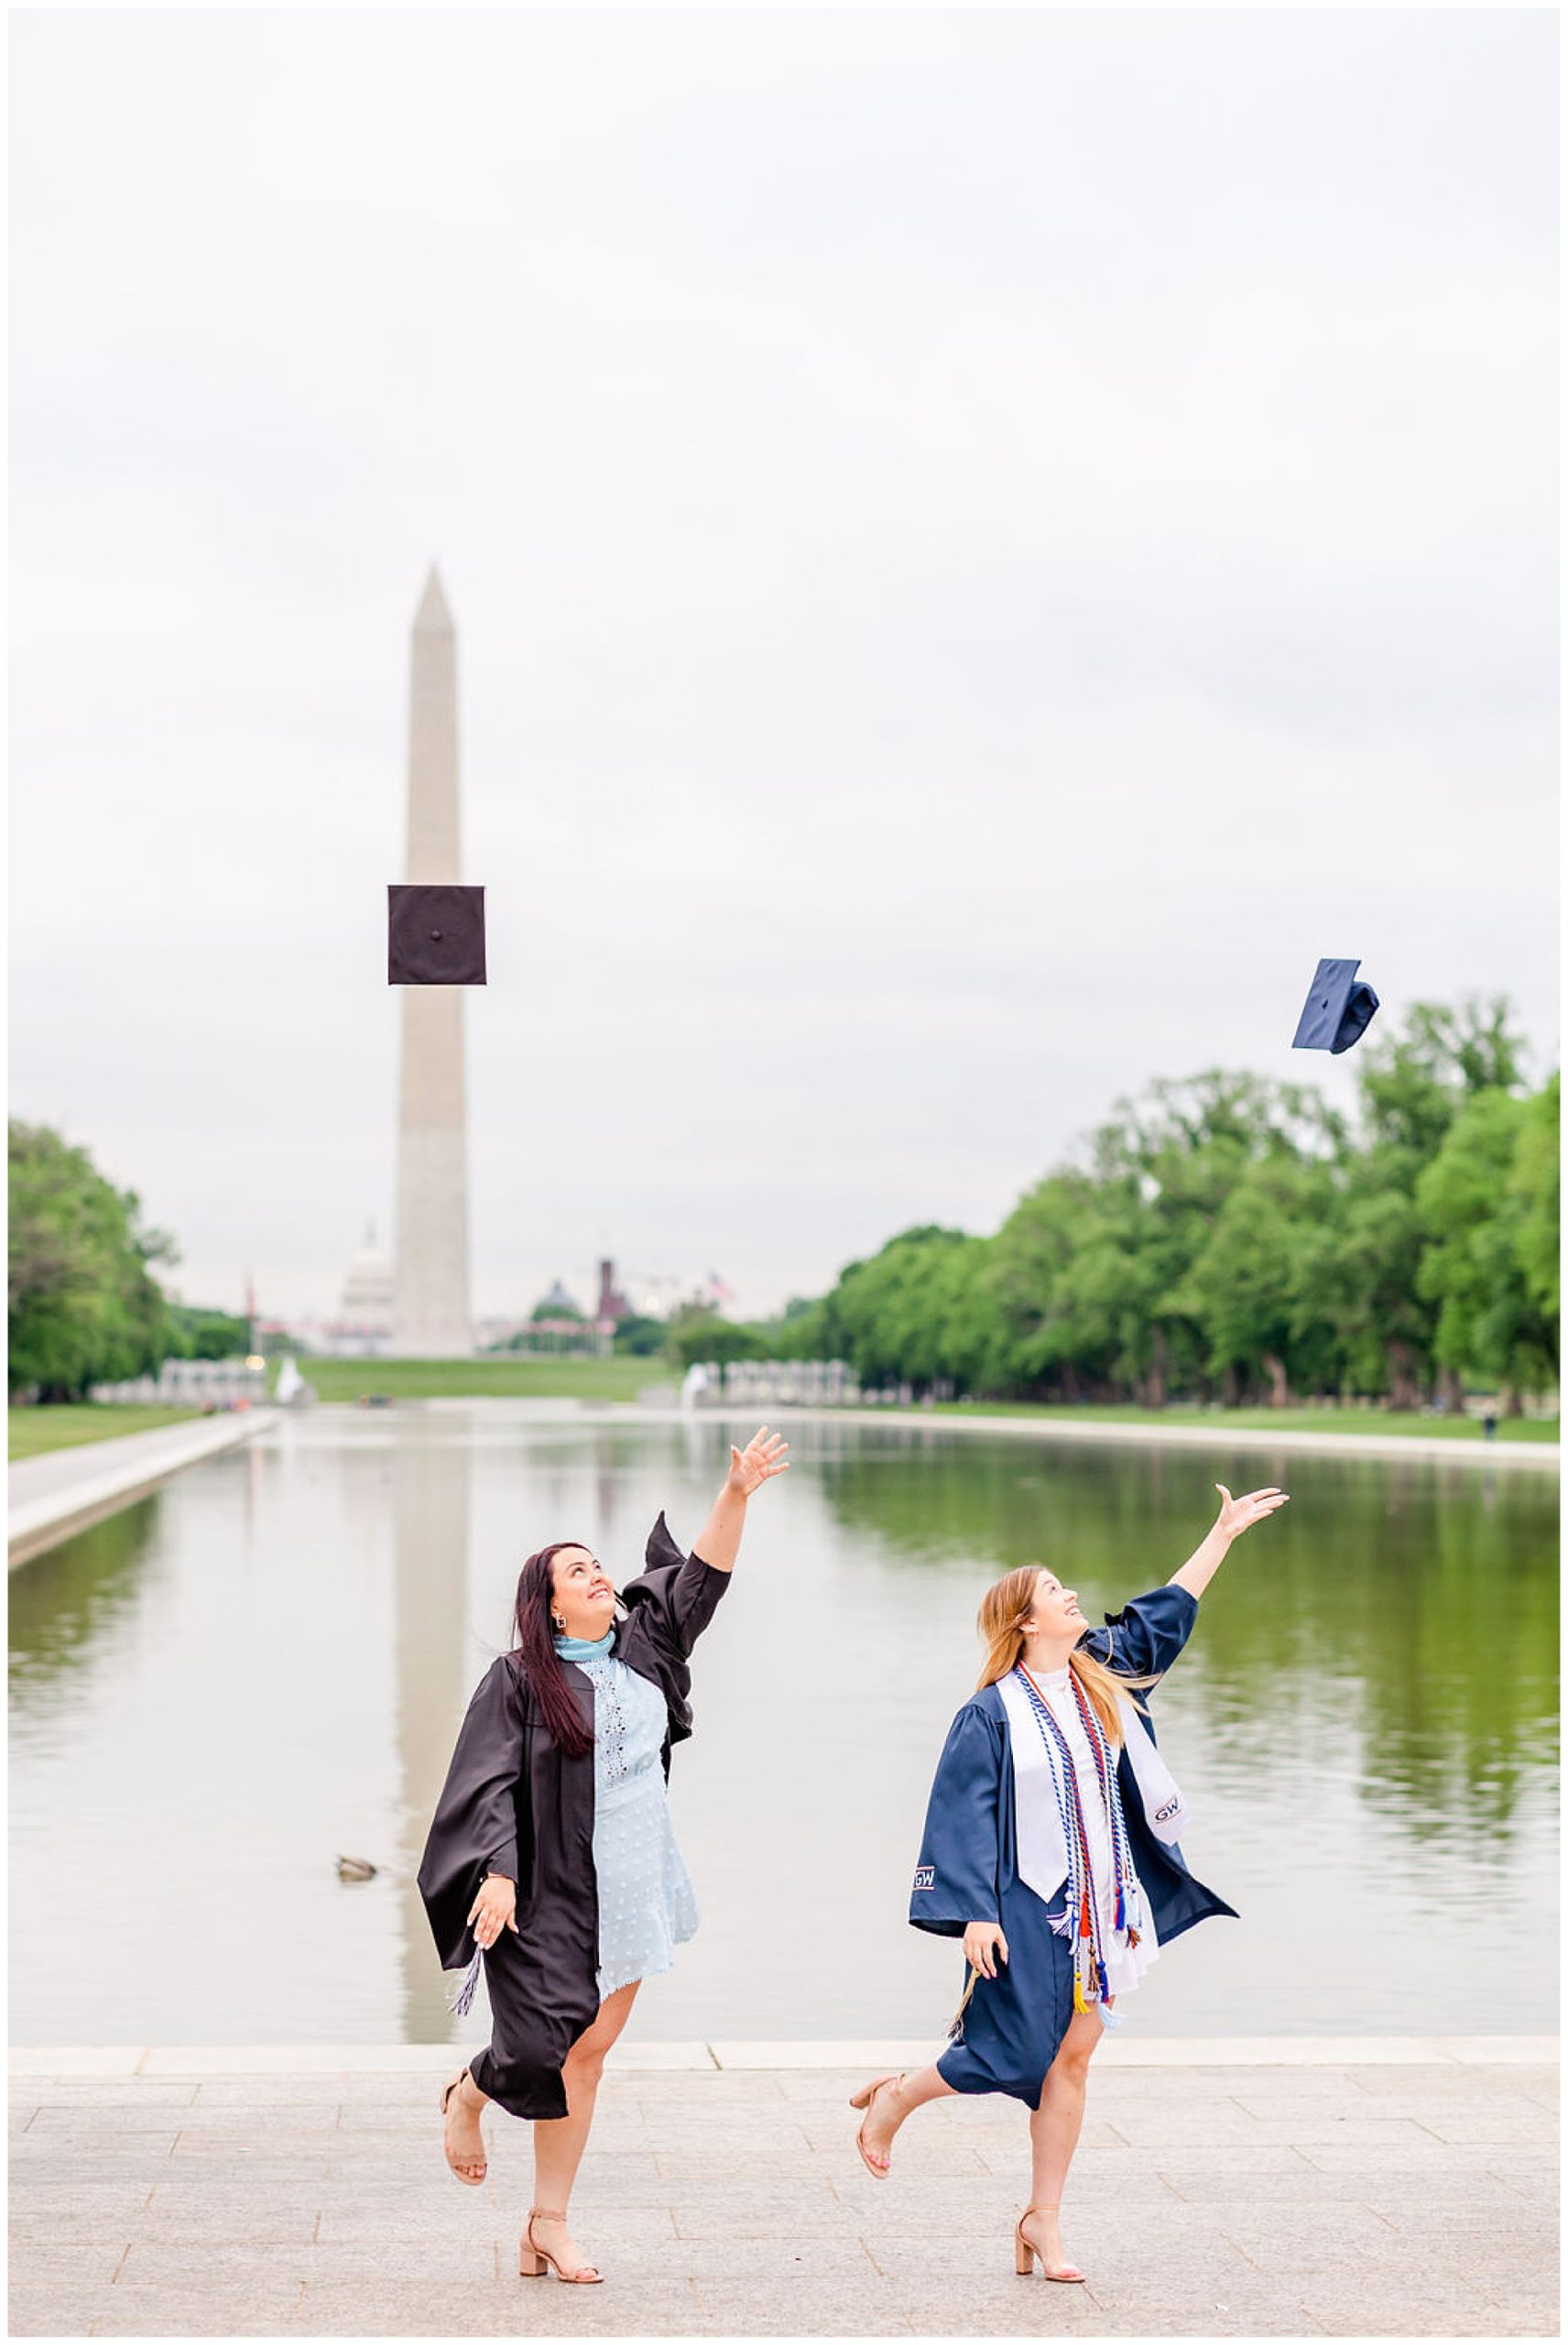 sister graduation photo session, Lincoln Memorial graduation photos, sibling graduation photos, magic hour graduation photos, Washington D.C. graduation photos, D.C graduates, Rachel E.H. Photographer, D.C. graduation photographer, women throwing graduation caps in air, women in graduation gowns, women in front of reflecting pool